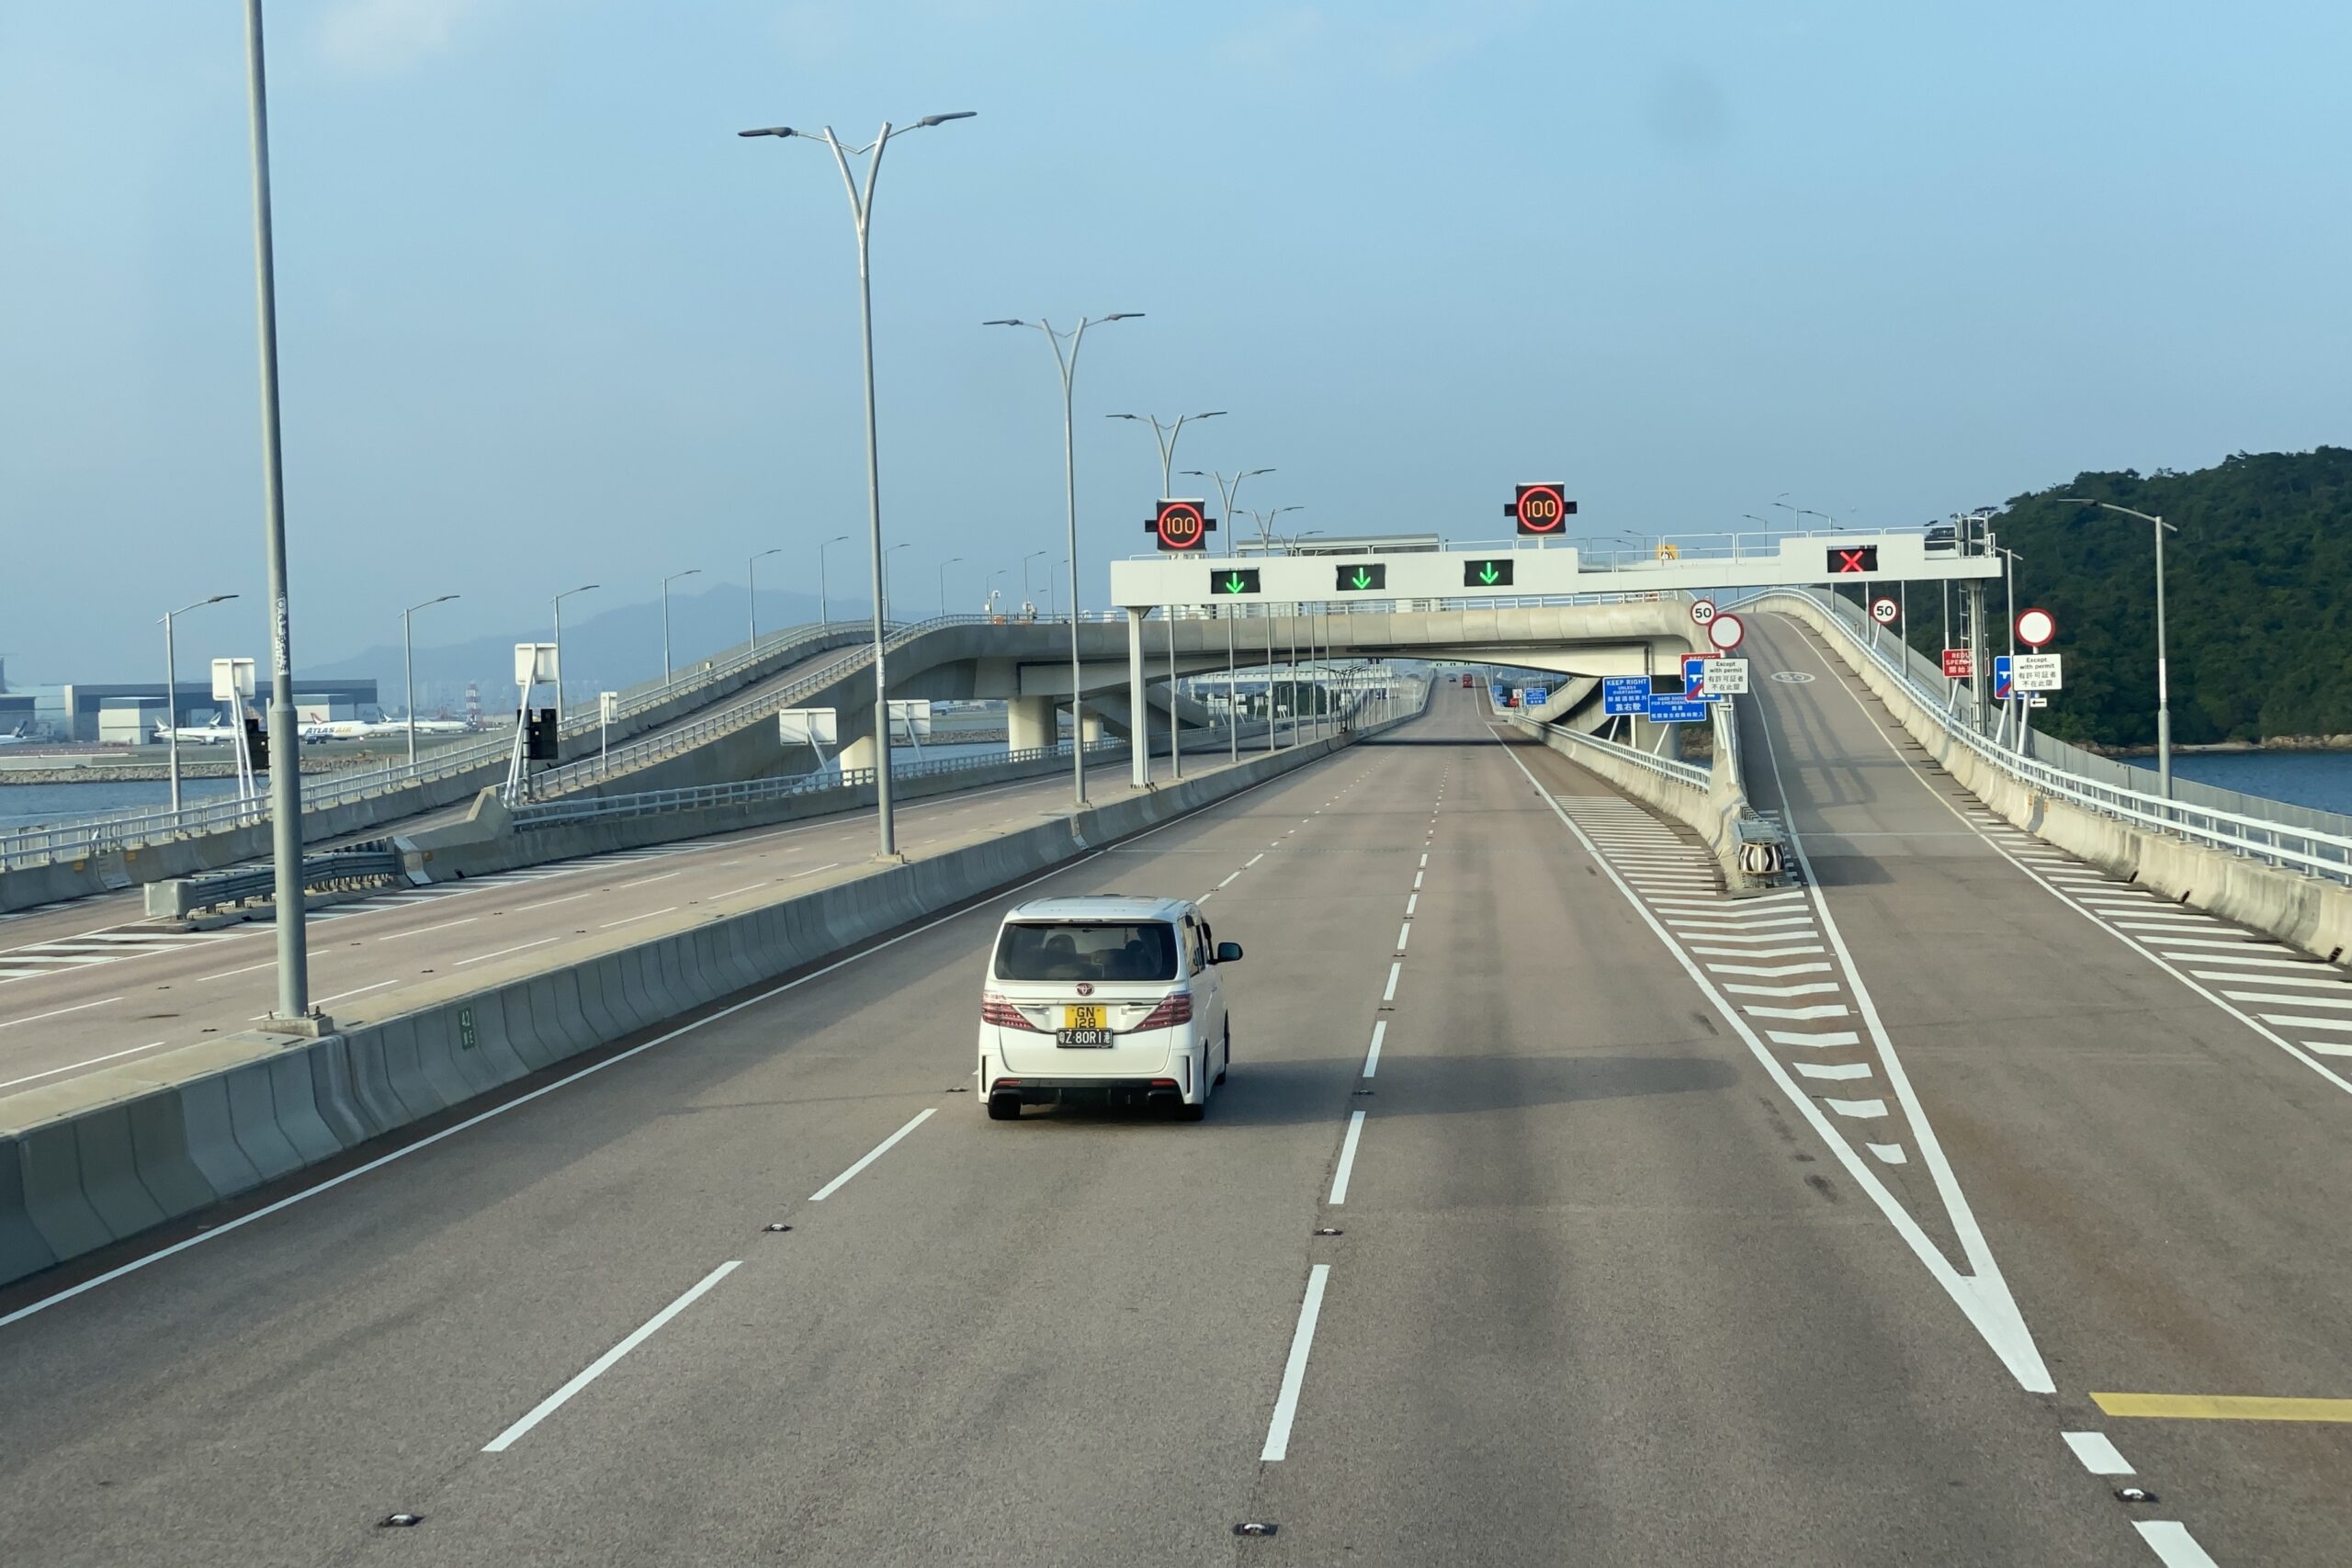 A white car drives down the Hong Kong section of the six-lane Hong Kong-Zhuhai-Macao Bridge. There are two indicators of the 100km/hr speed limit, as well as green arrow signs showing where cars should drive.